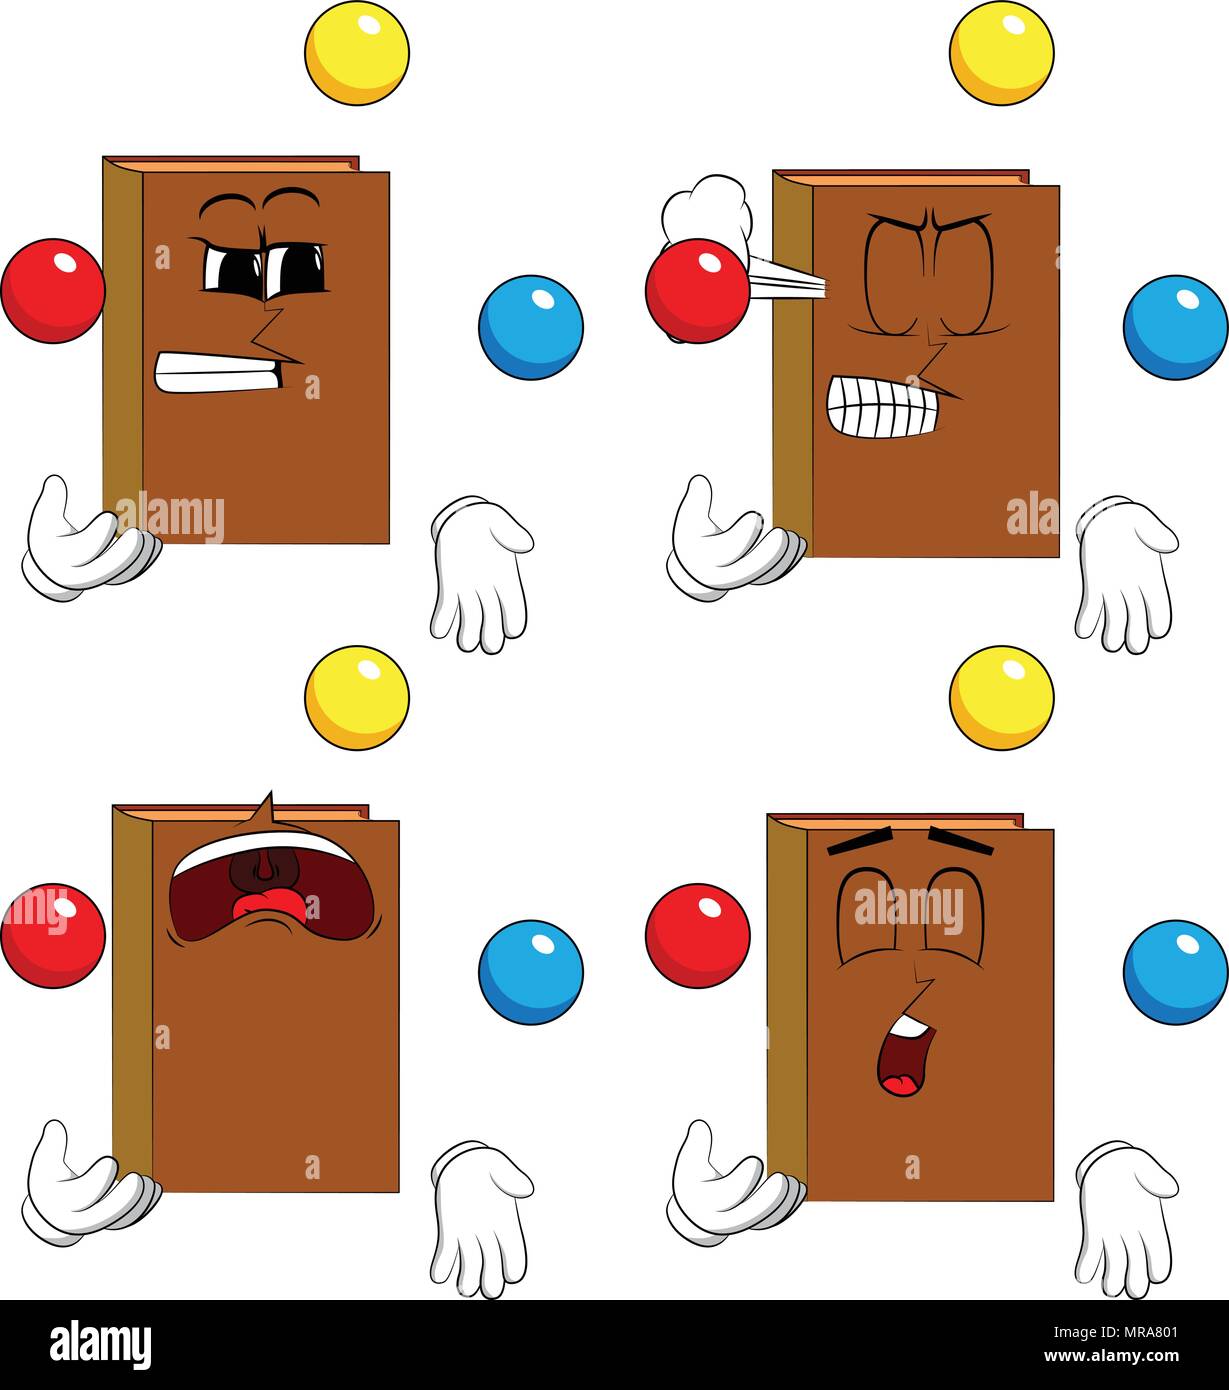 Books juggler. Cartoon book collection with angry and sad faces. Expressions vector set. Stock Vector